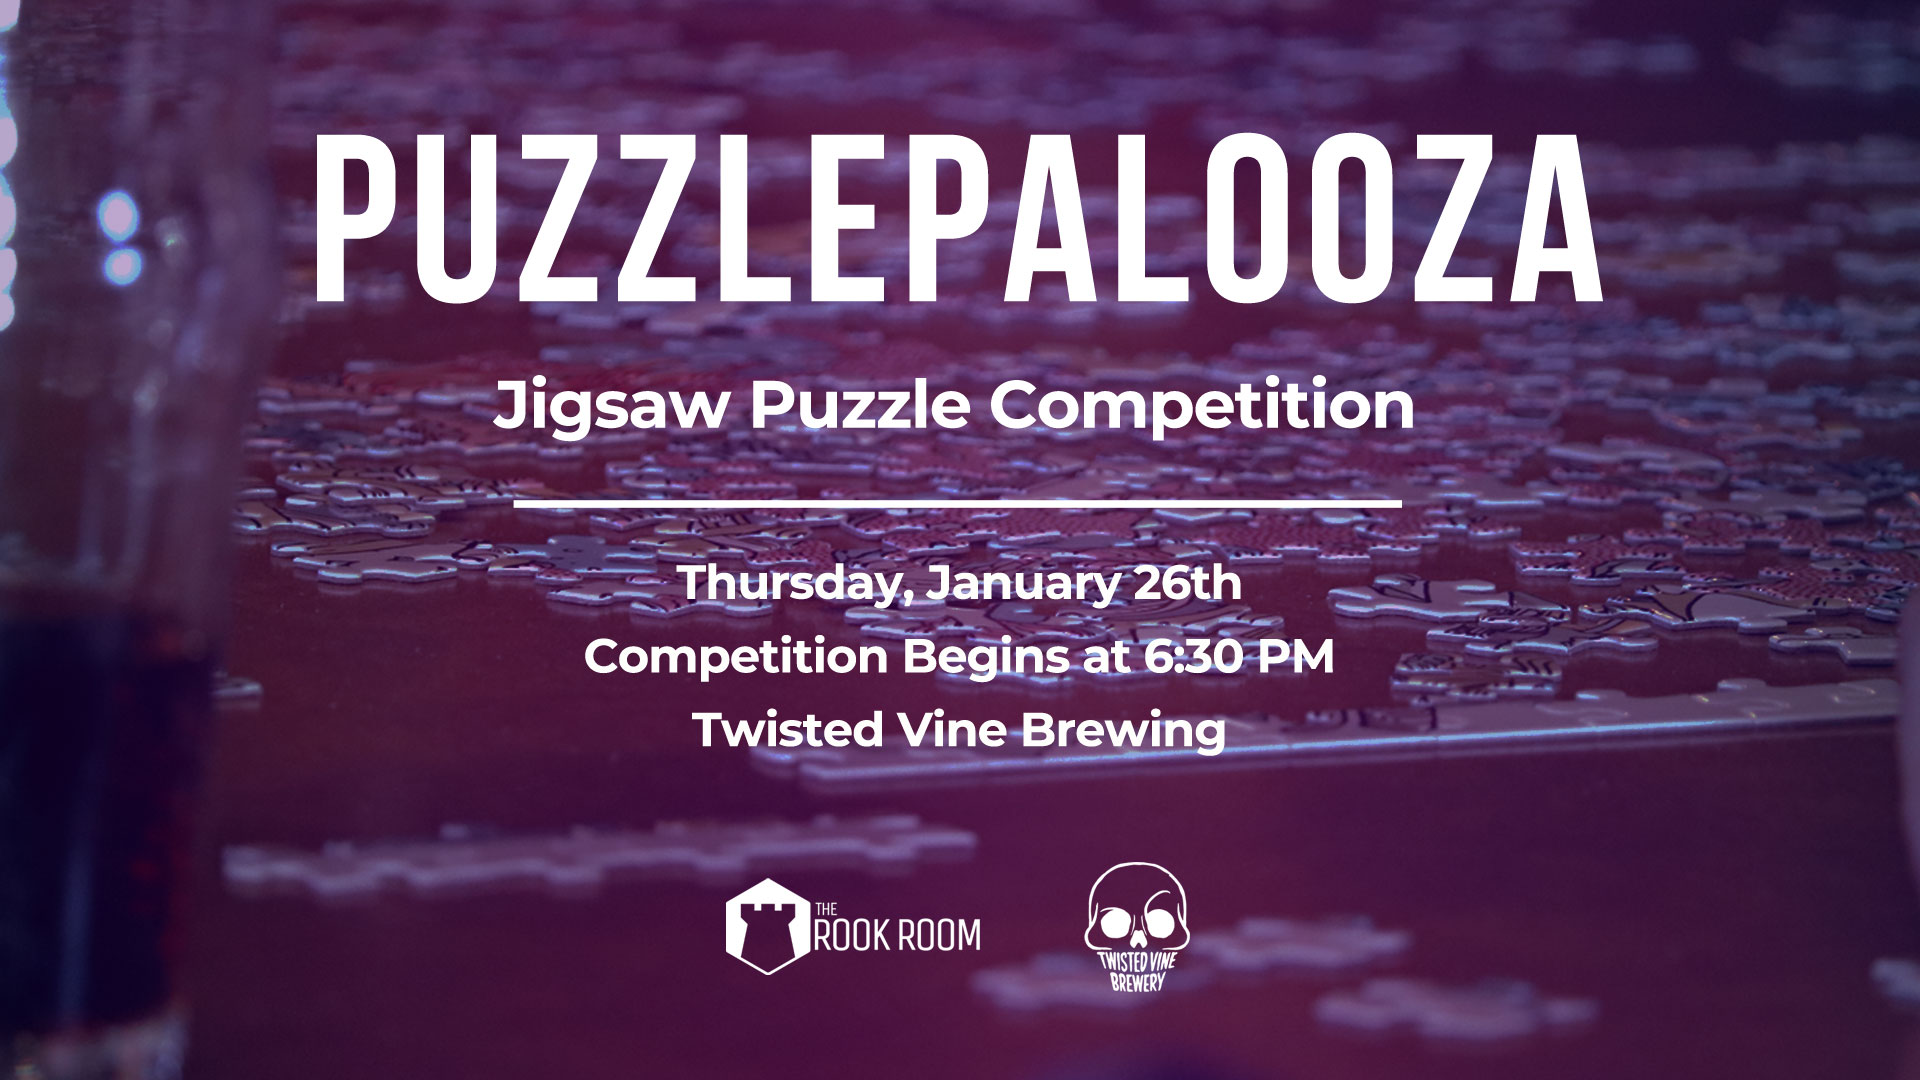 Puzzlepalooza Jigsaw Puzzle Competition Twisted Vine Des Moines January 26, 2023 Event Image